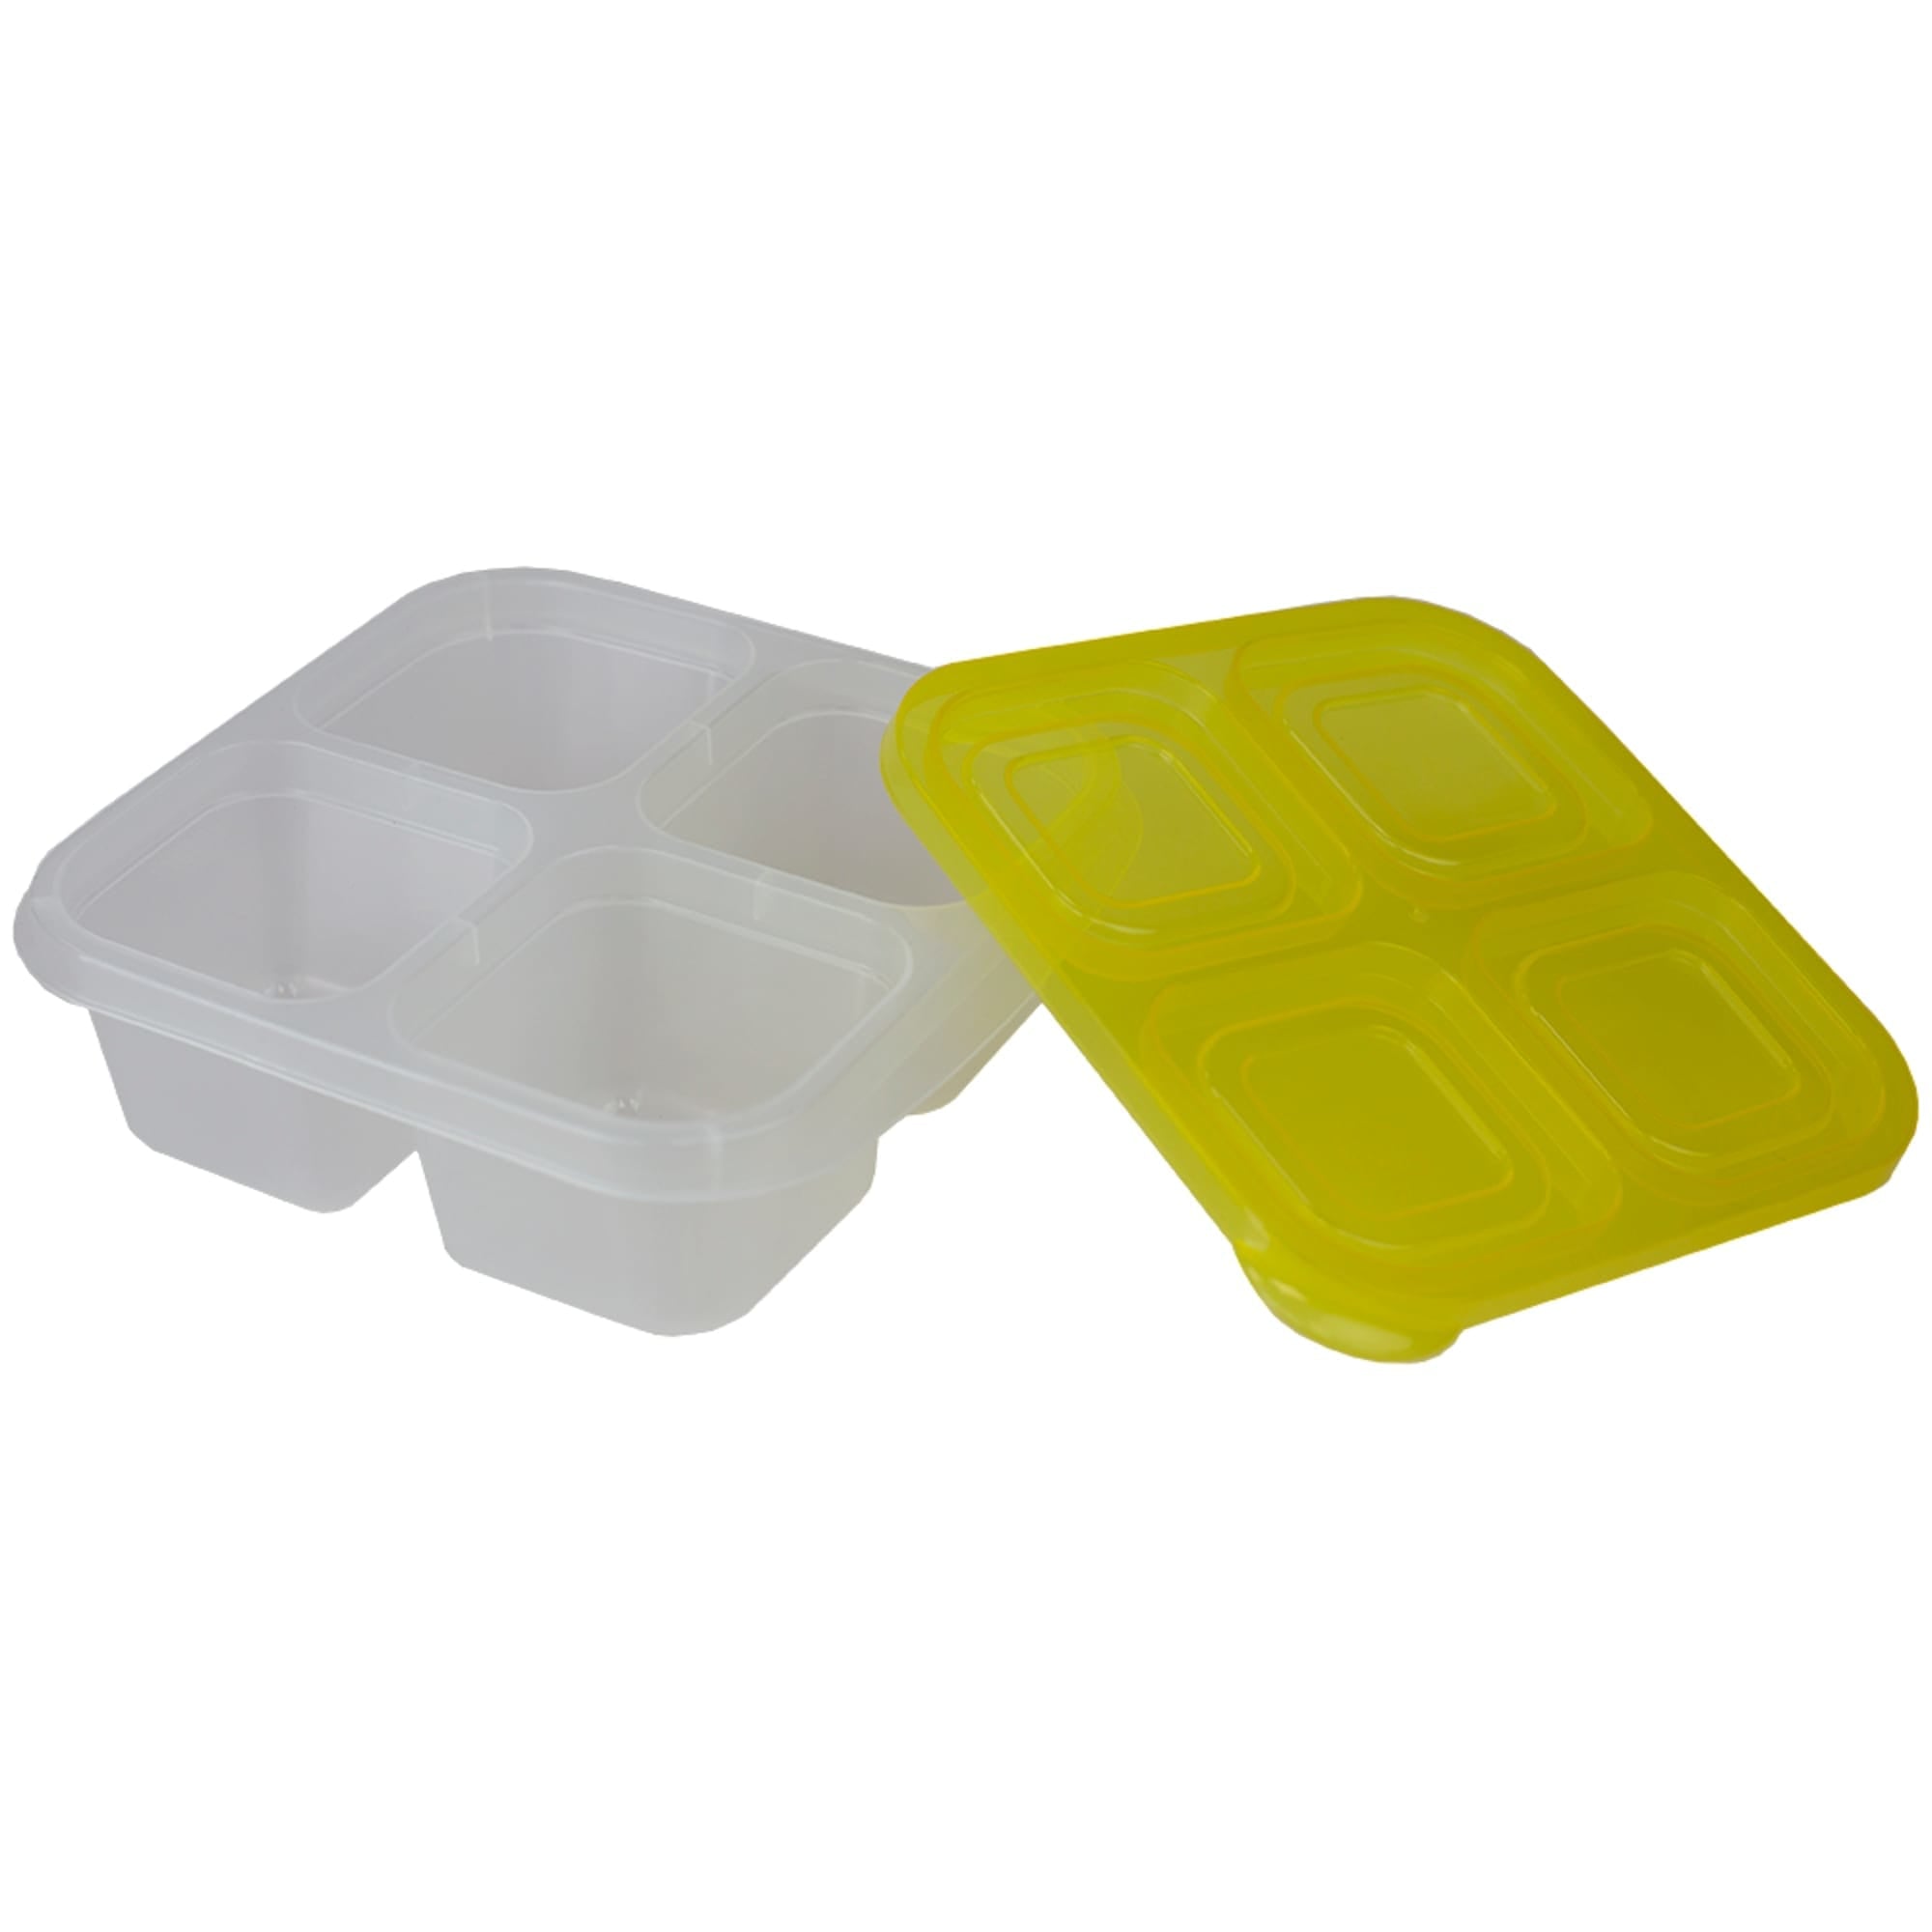 Home Basics Four Compartment Plastic Food Storage Container Set, (Set of 8), Multi-Color $6 EACH, CASE PACK OF 12